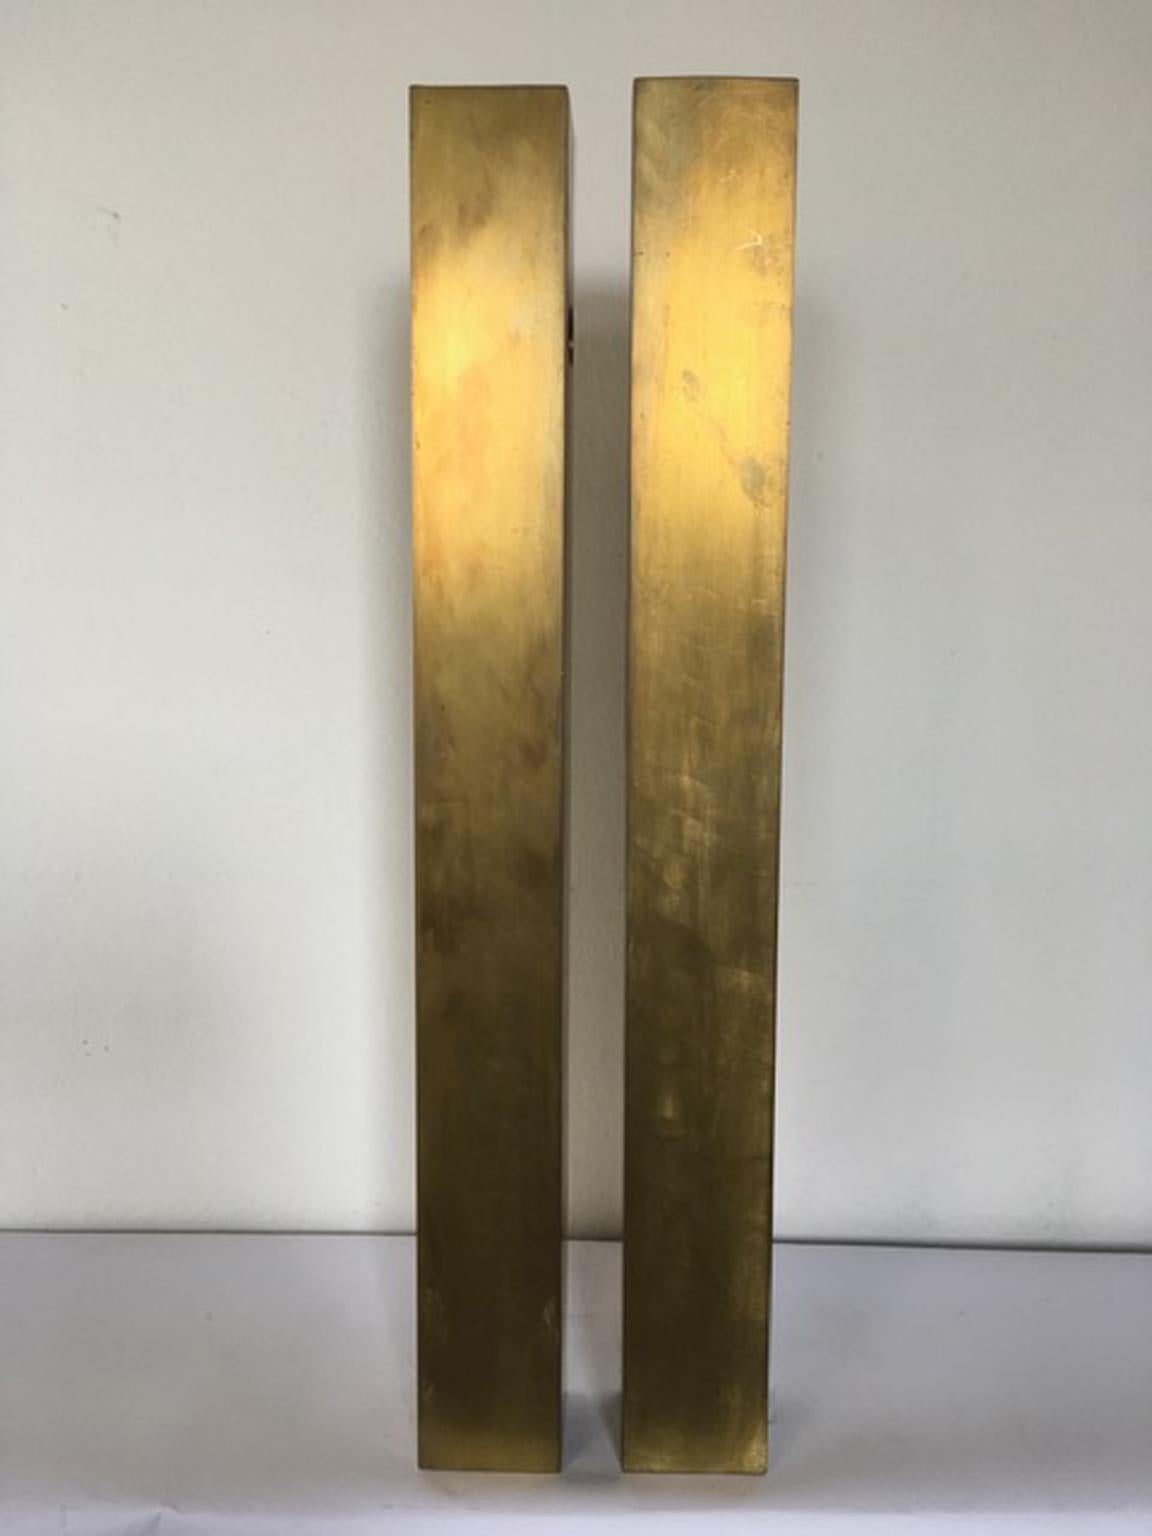 Italy 1998 the Skyscrapers Brass Abstract Sculpture For Sale 6